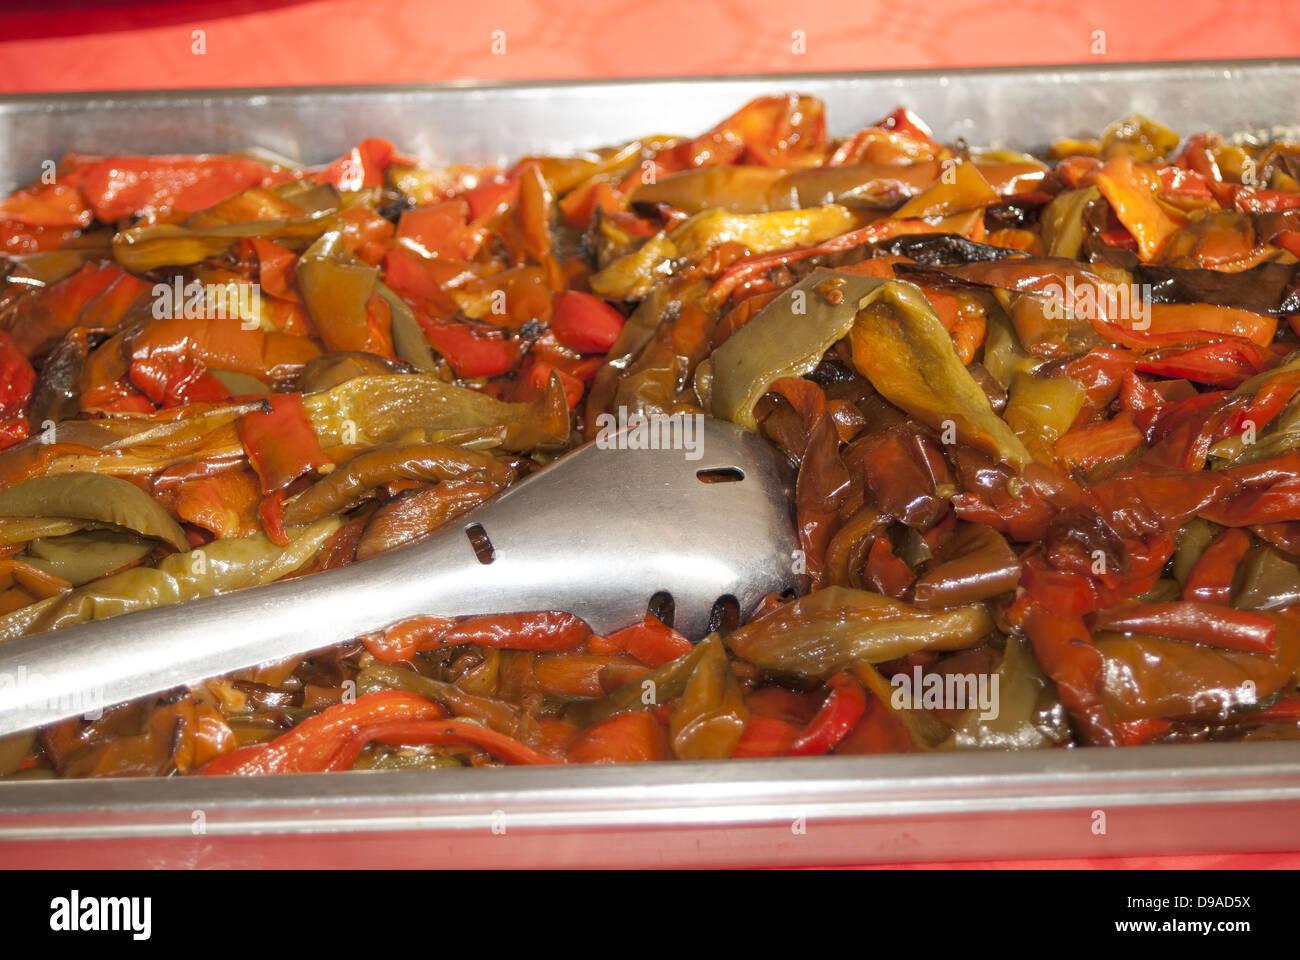 a tray of red peppers Stock Photo